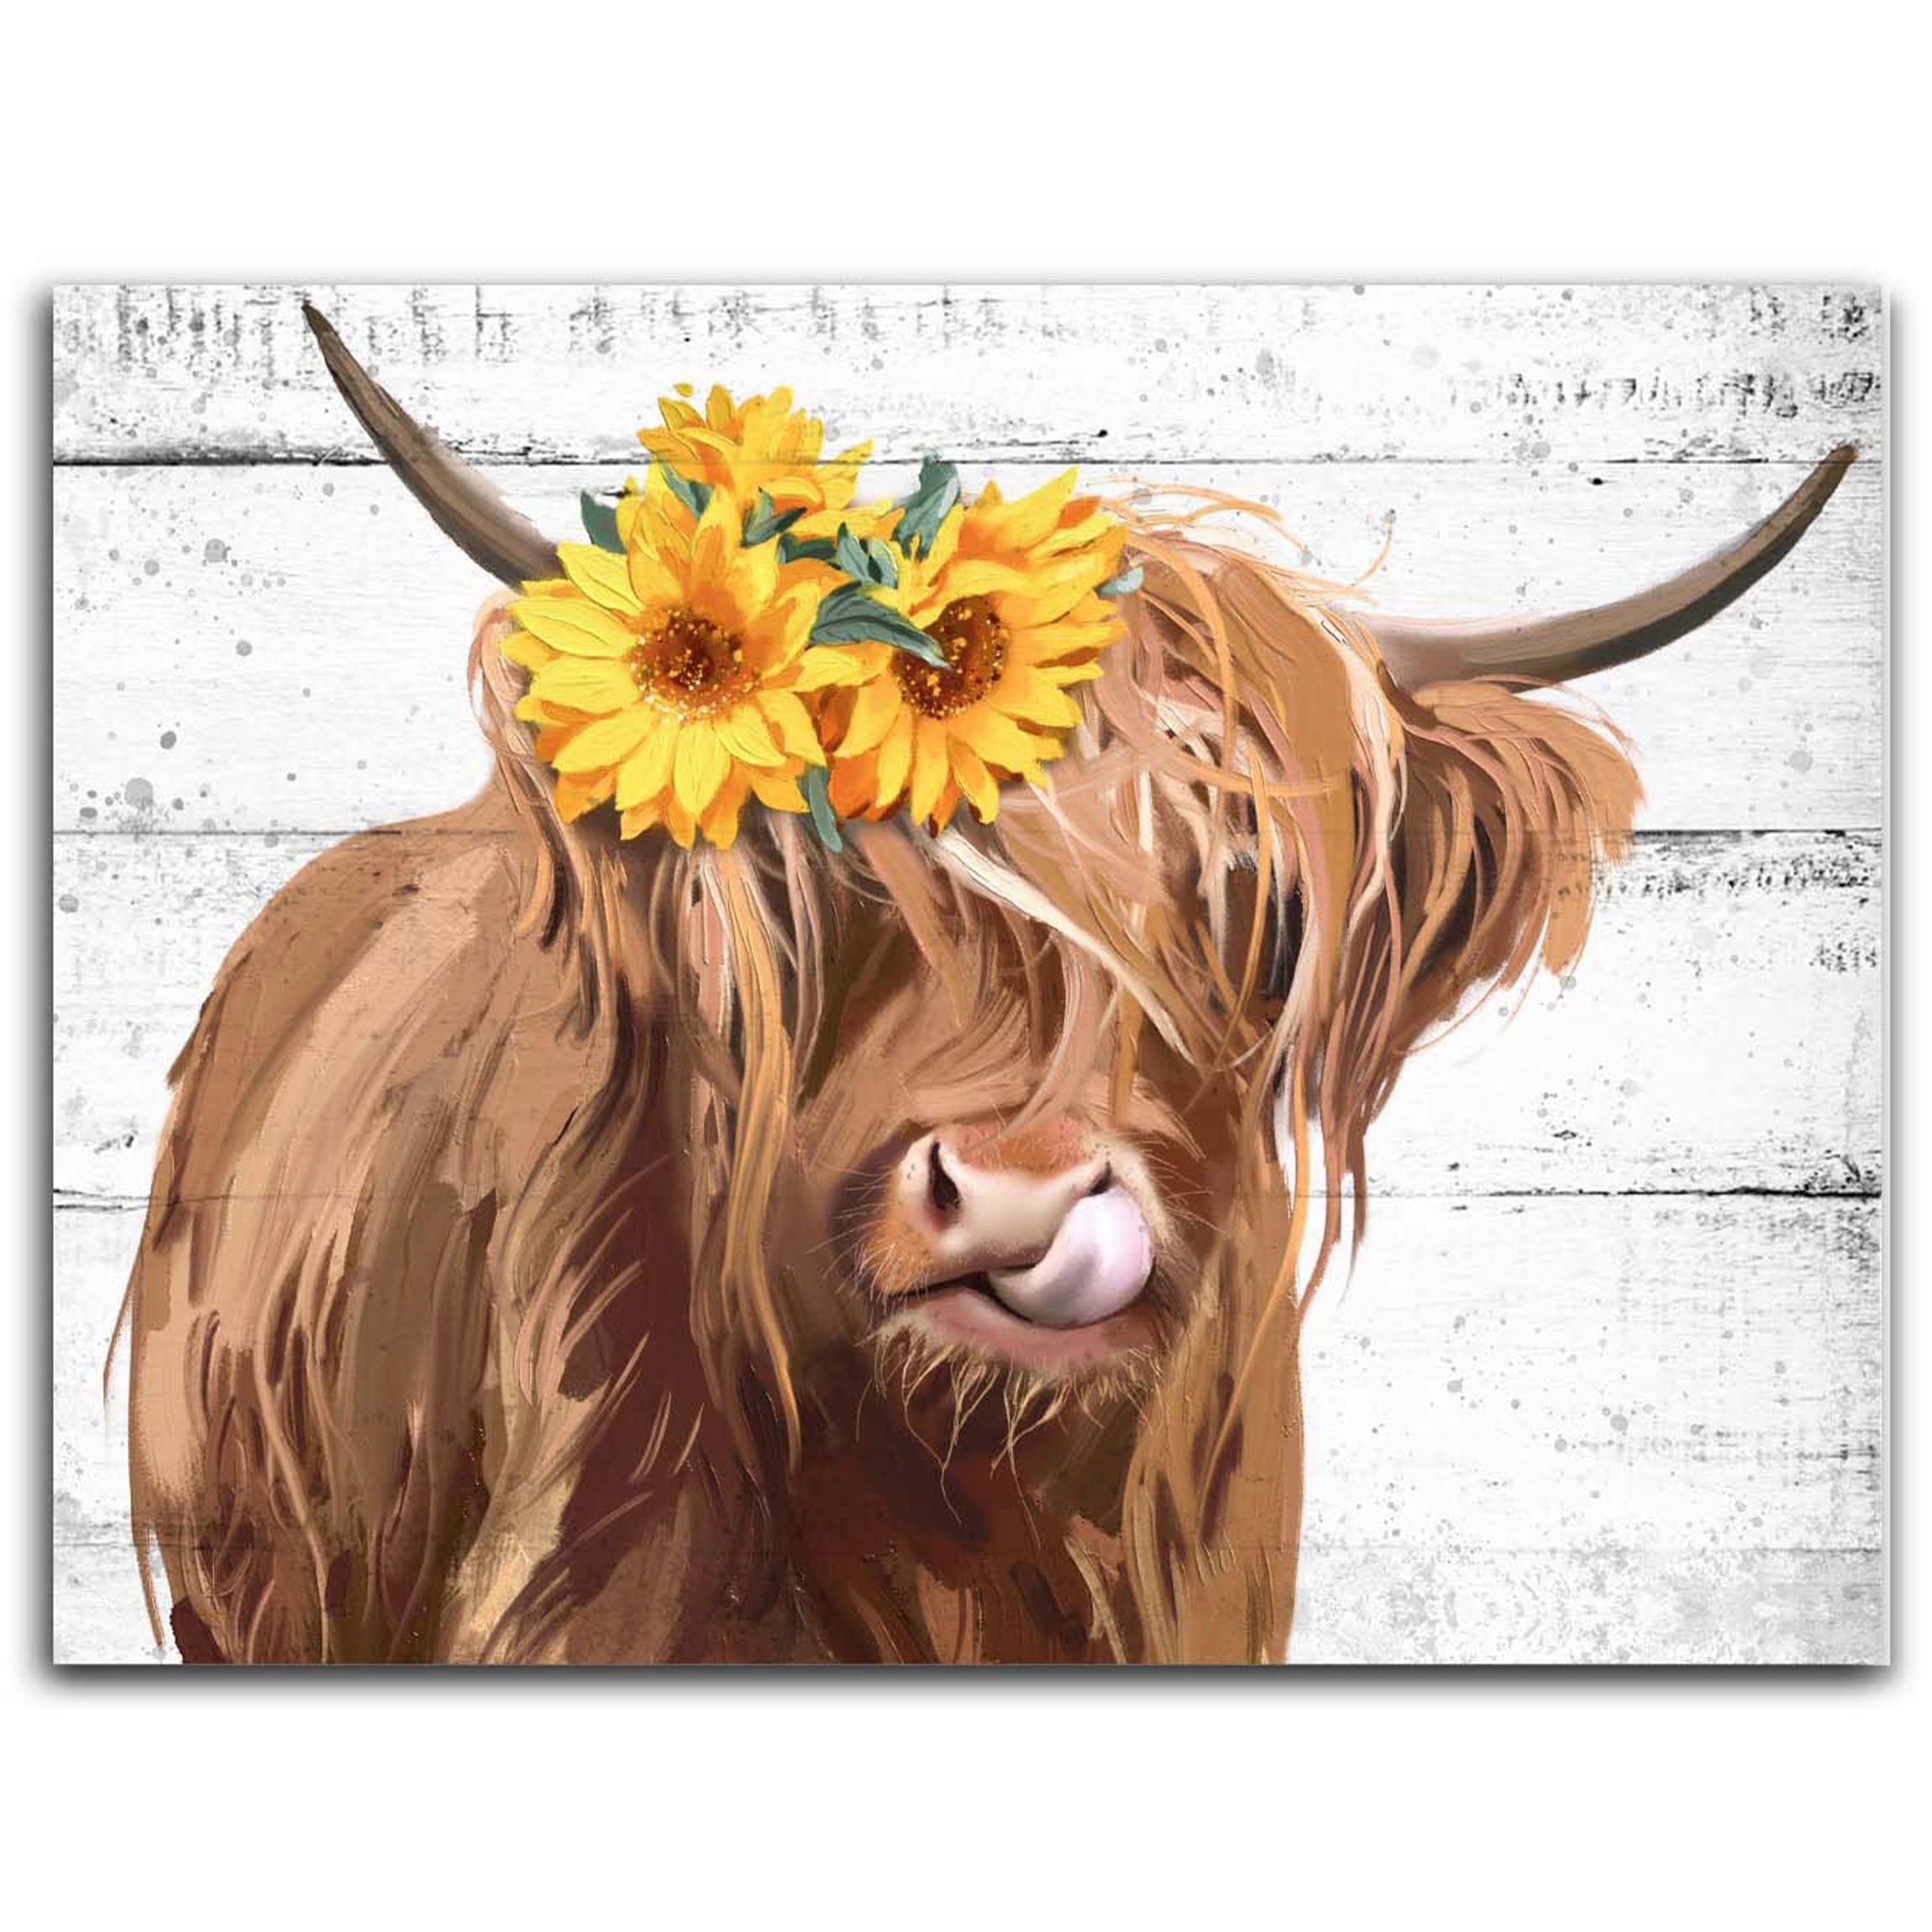 Cool Highland Cow Wall Art Brown Highland Cattle Portrait Picture Giclee Print On Canvas Animal Poster Painting Artwork, Great for Home Living Room Be - 2